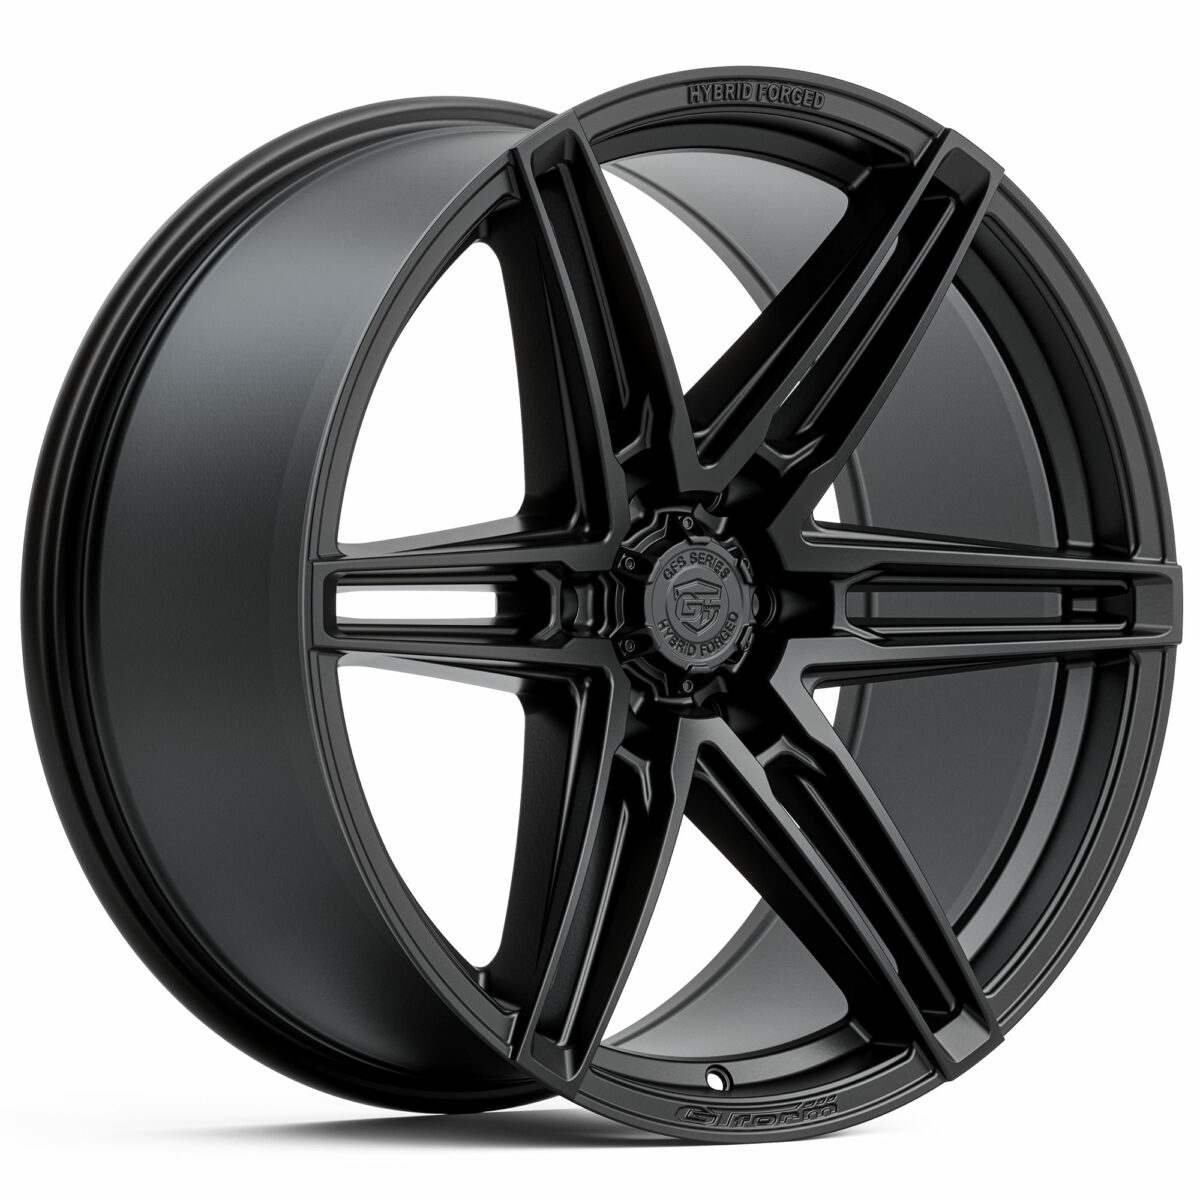 4X4 WHEELS GT FORM GFS2 HYBRID FORGED SATIN BLACK 20 INCH OFFROAD RIMS FOR 4WD SUV